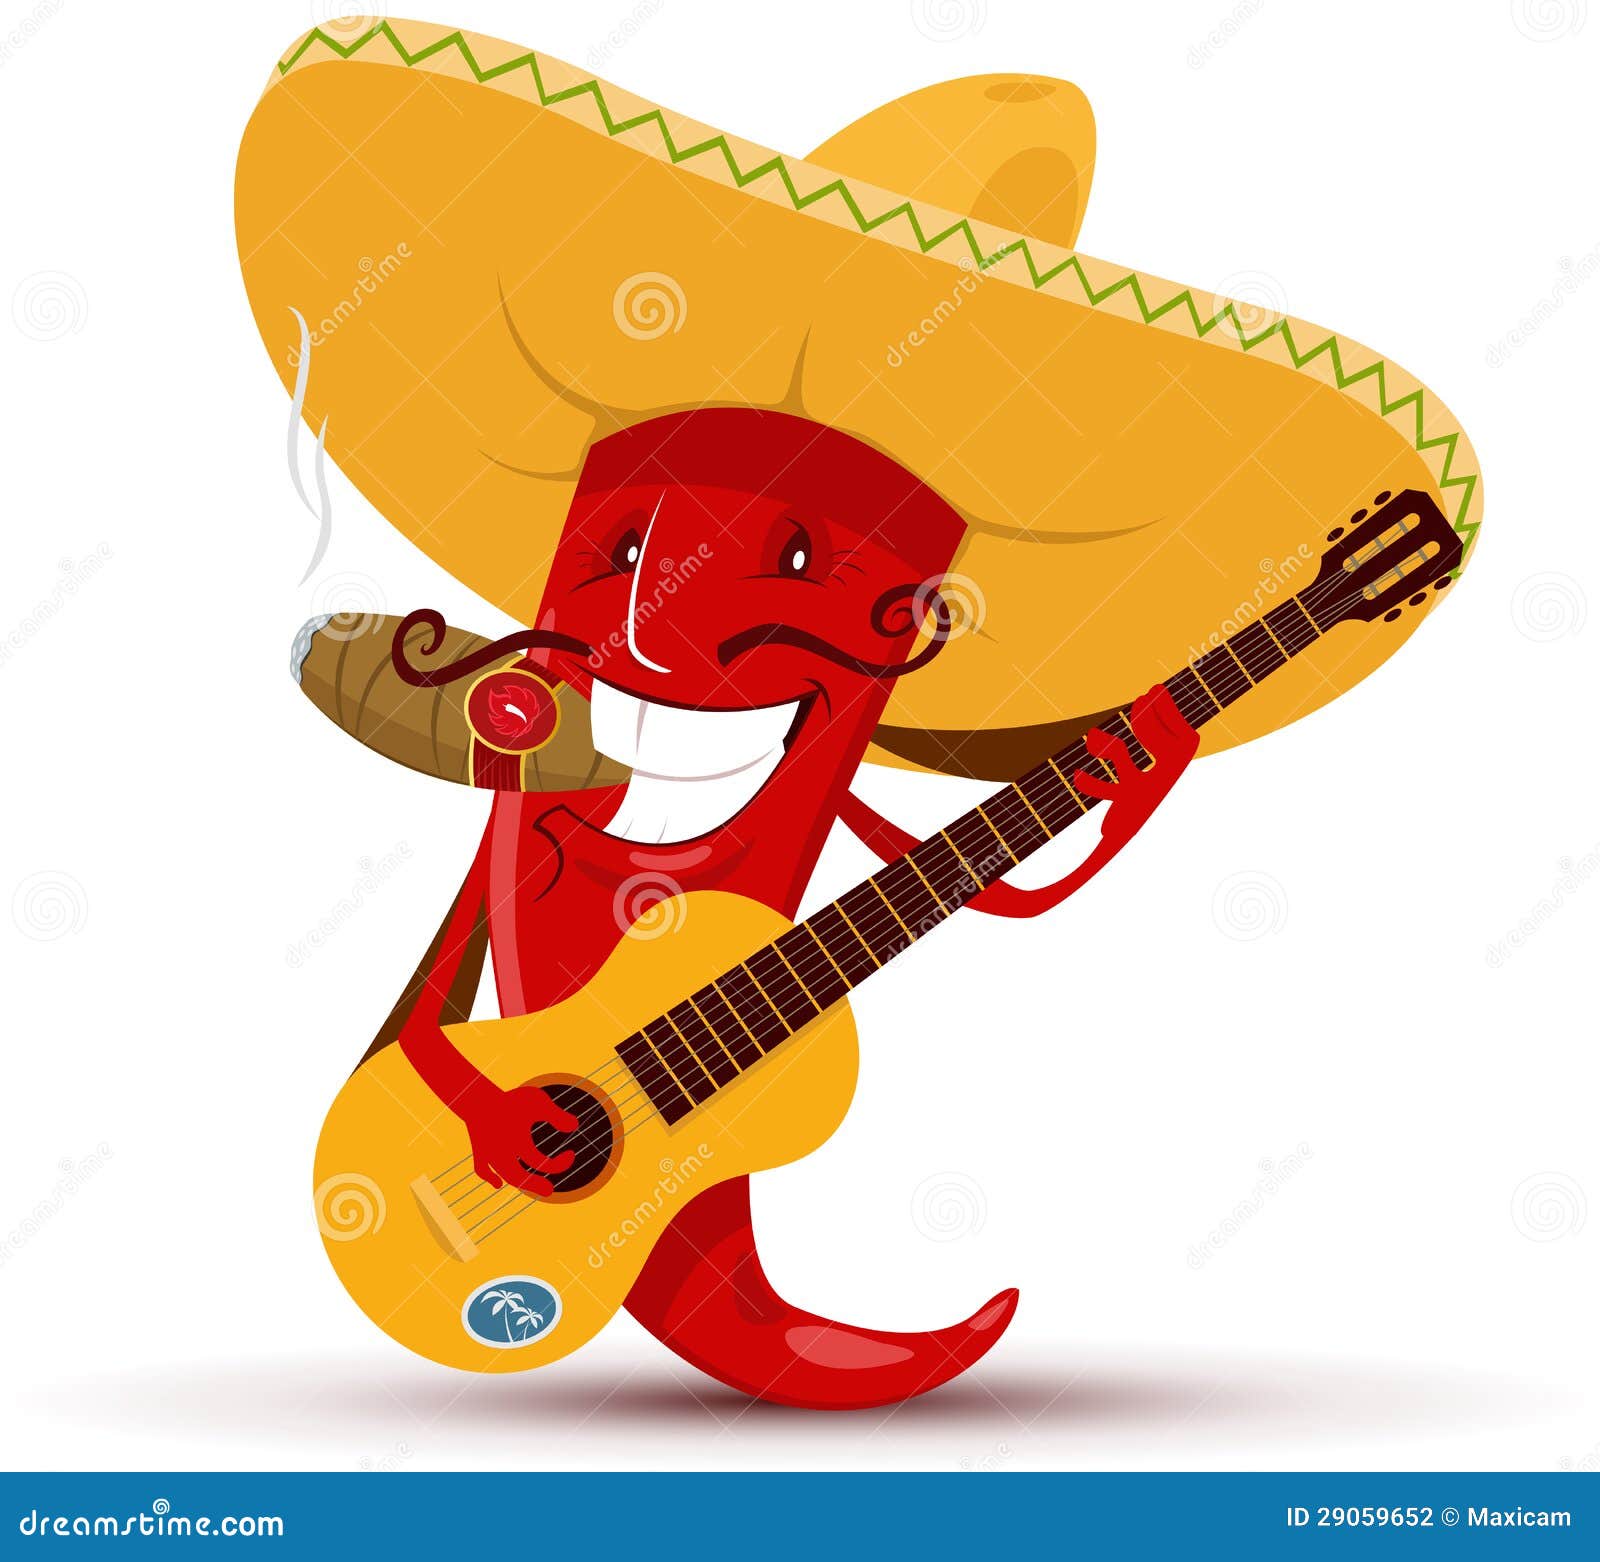 red-chili-pepper-which-playing-guitar-smoking-cigar-29059652.jpg